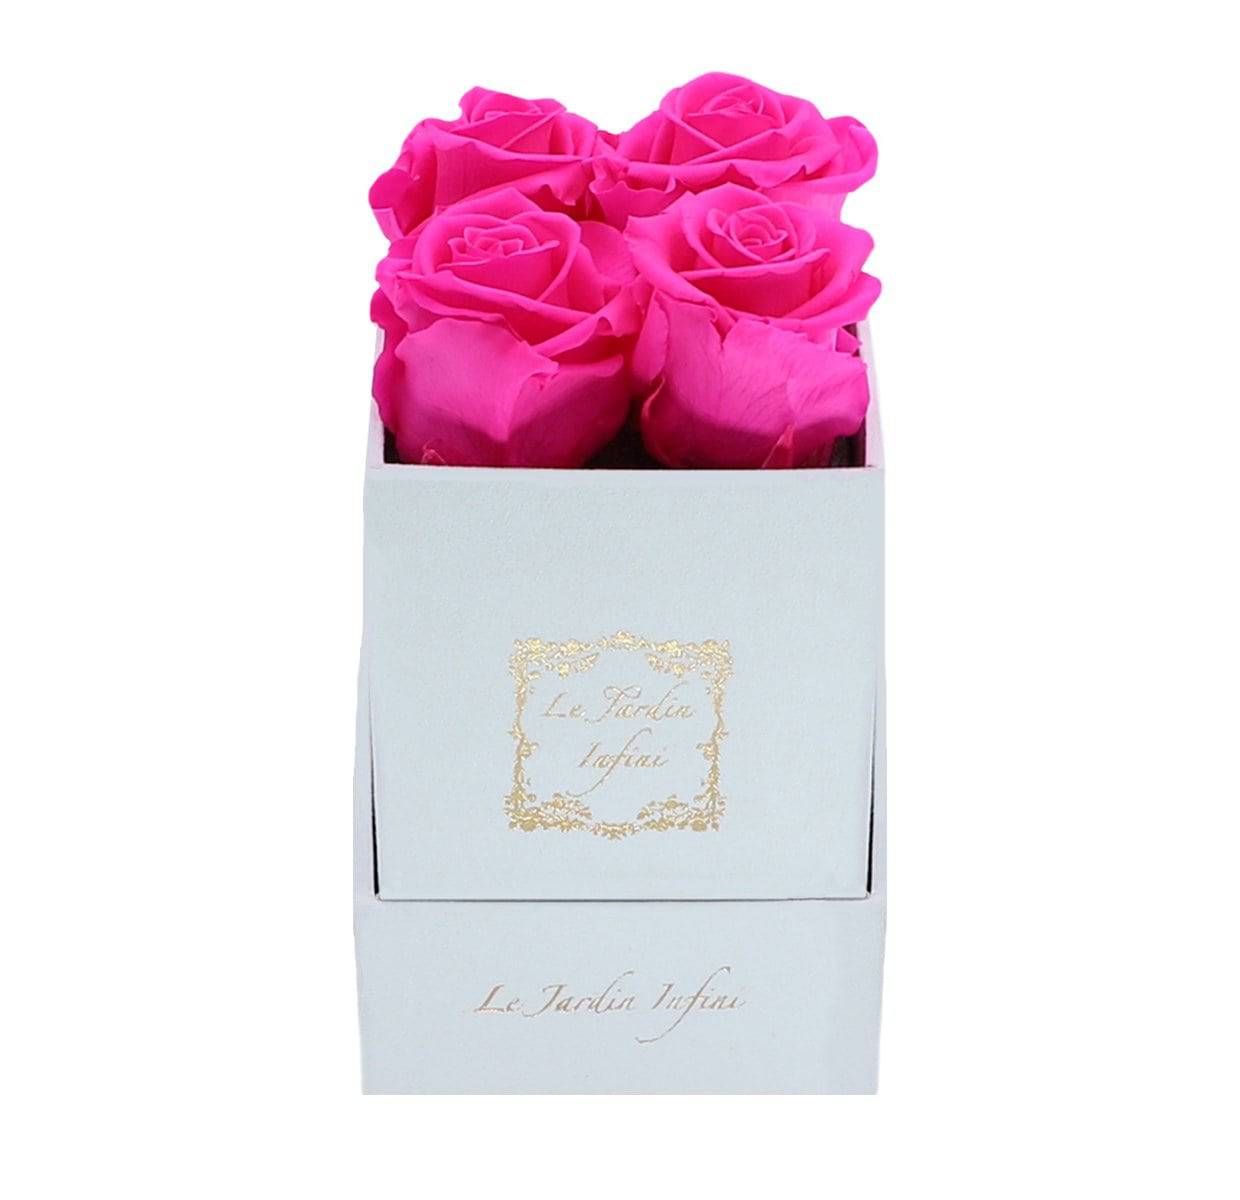 Hot Pink Roses in a box - Small Square White Box